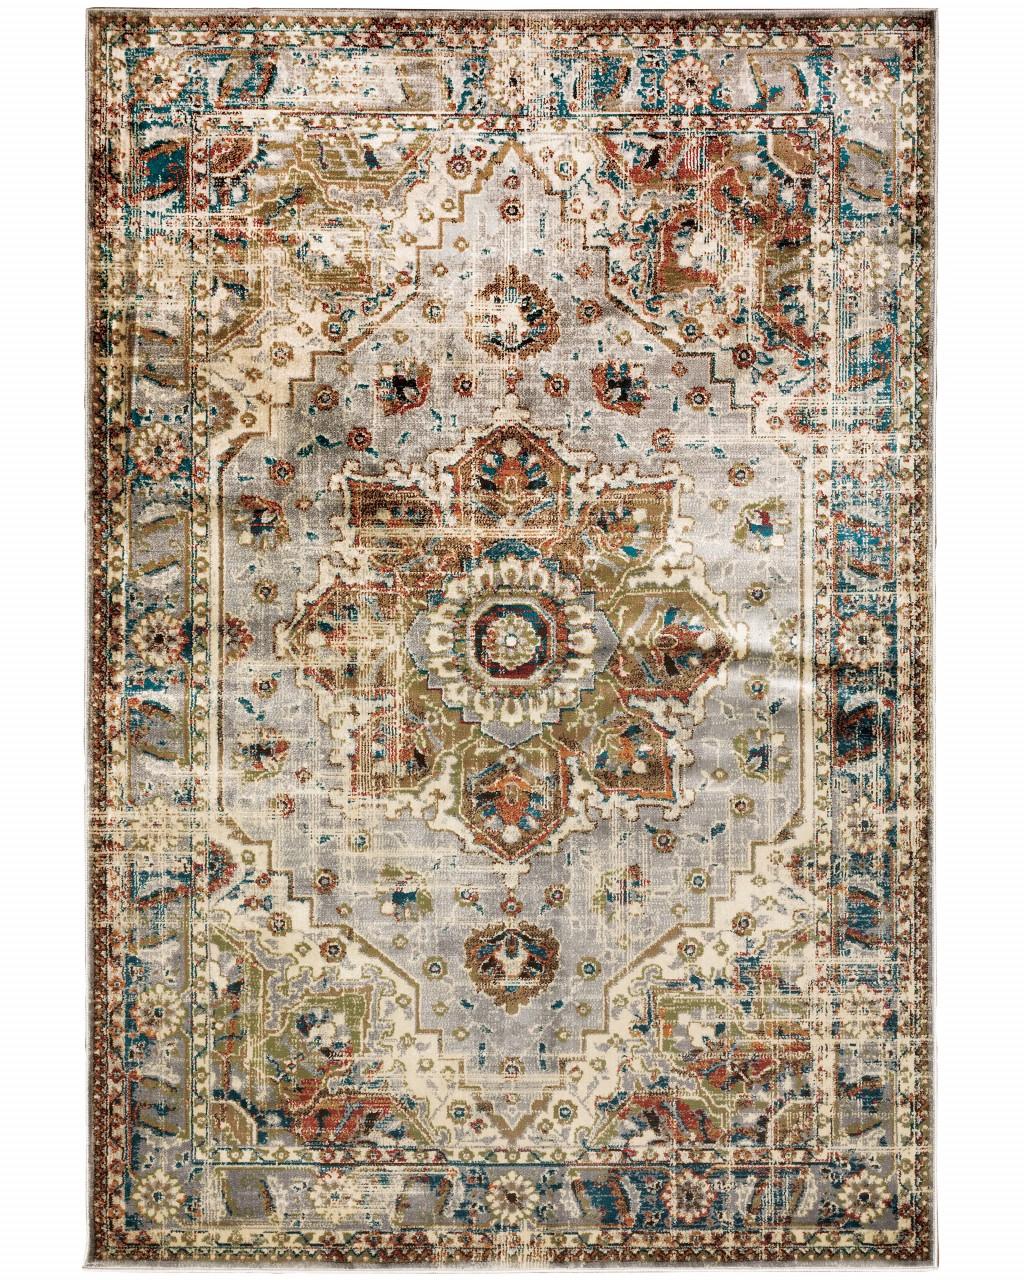 10’ x 13’ Gray and Rust Distressed Medallion Area Rug Default Title